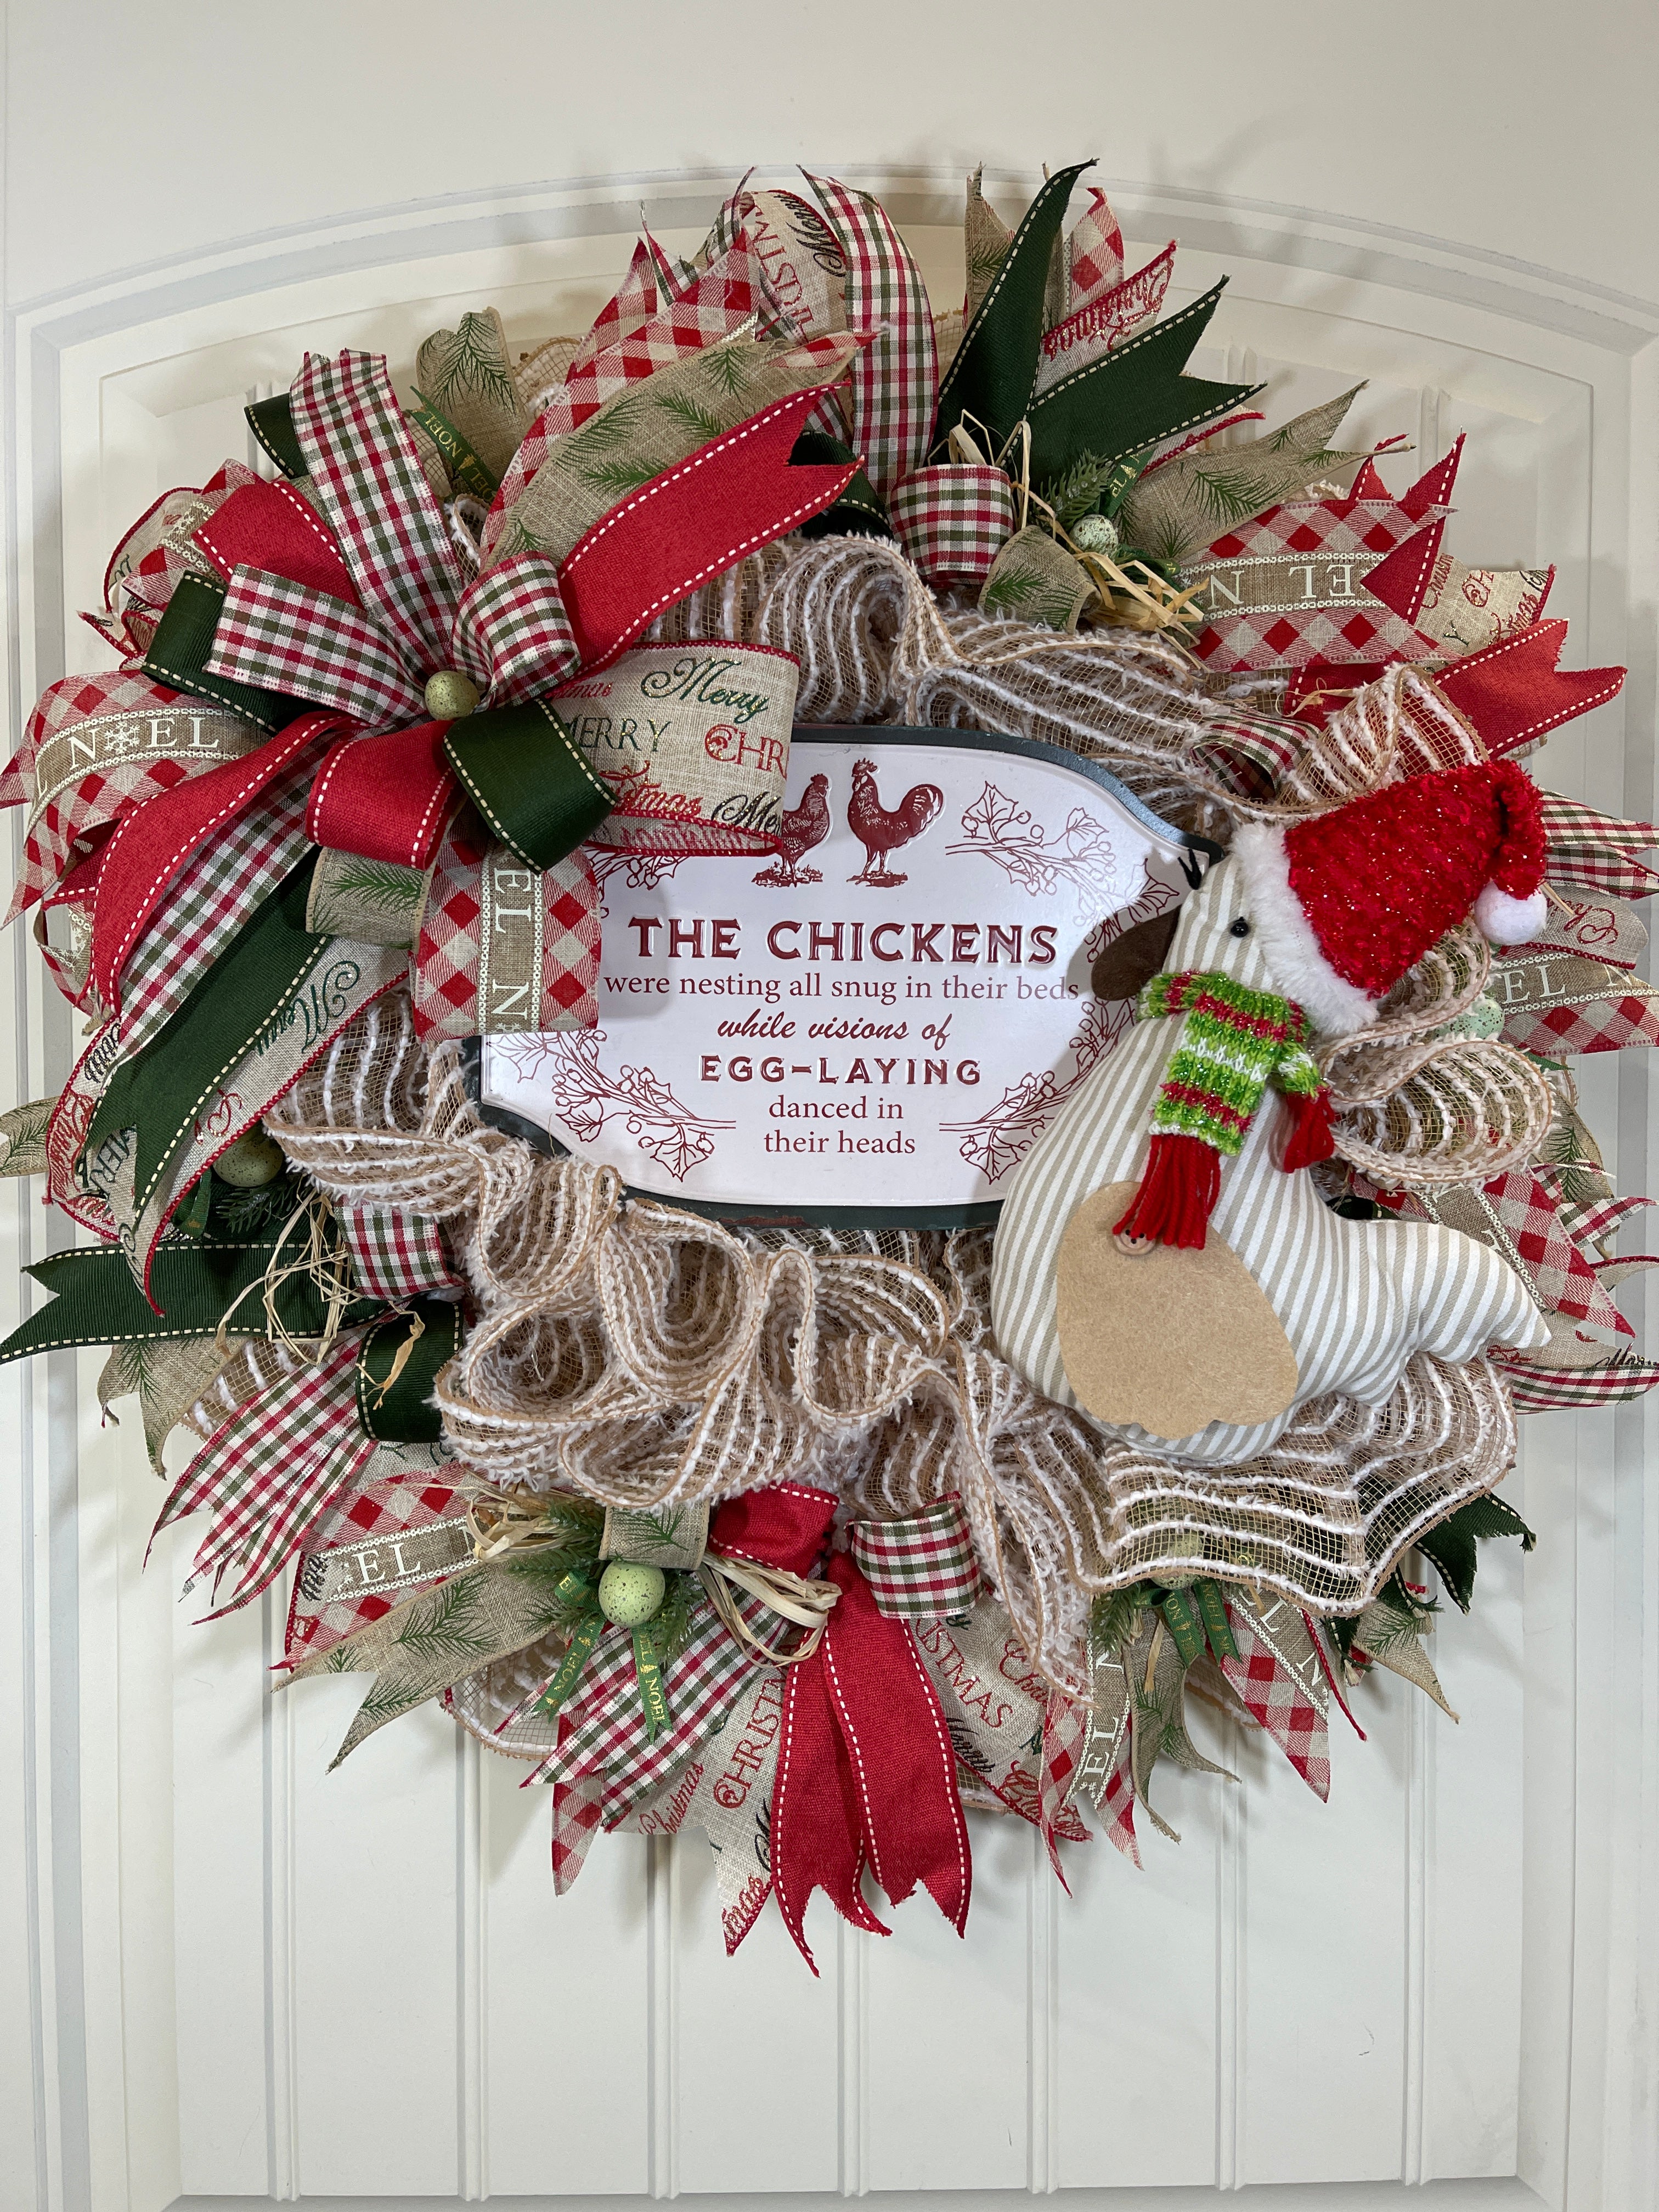 Red, White and Green Deco Mesh Christmas Chicken Wreath with Stuffed Chicken Wearing a Santa hat with Sign, The Chickens were nesting all snug in their beds while visions of egg laying danced in their heads.